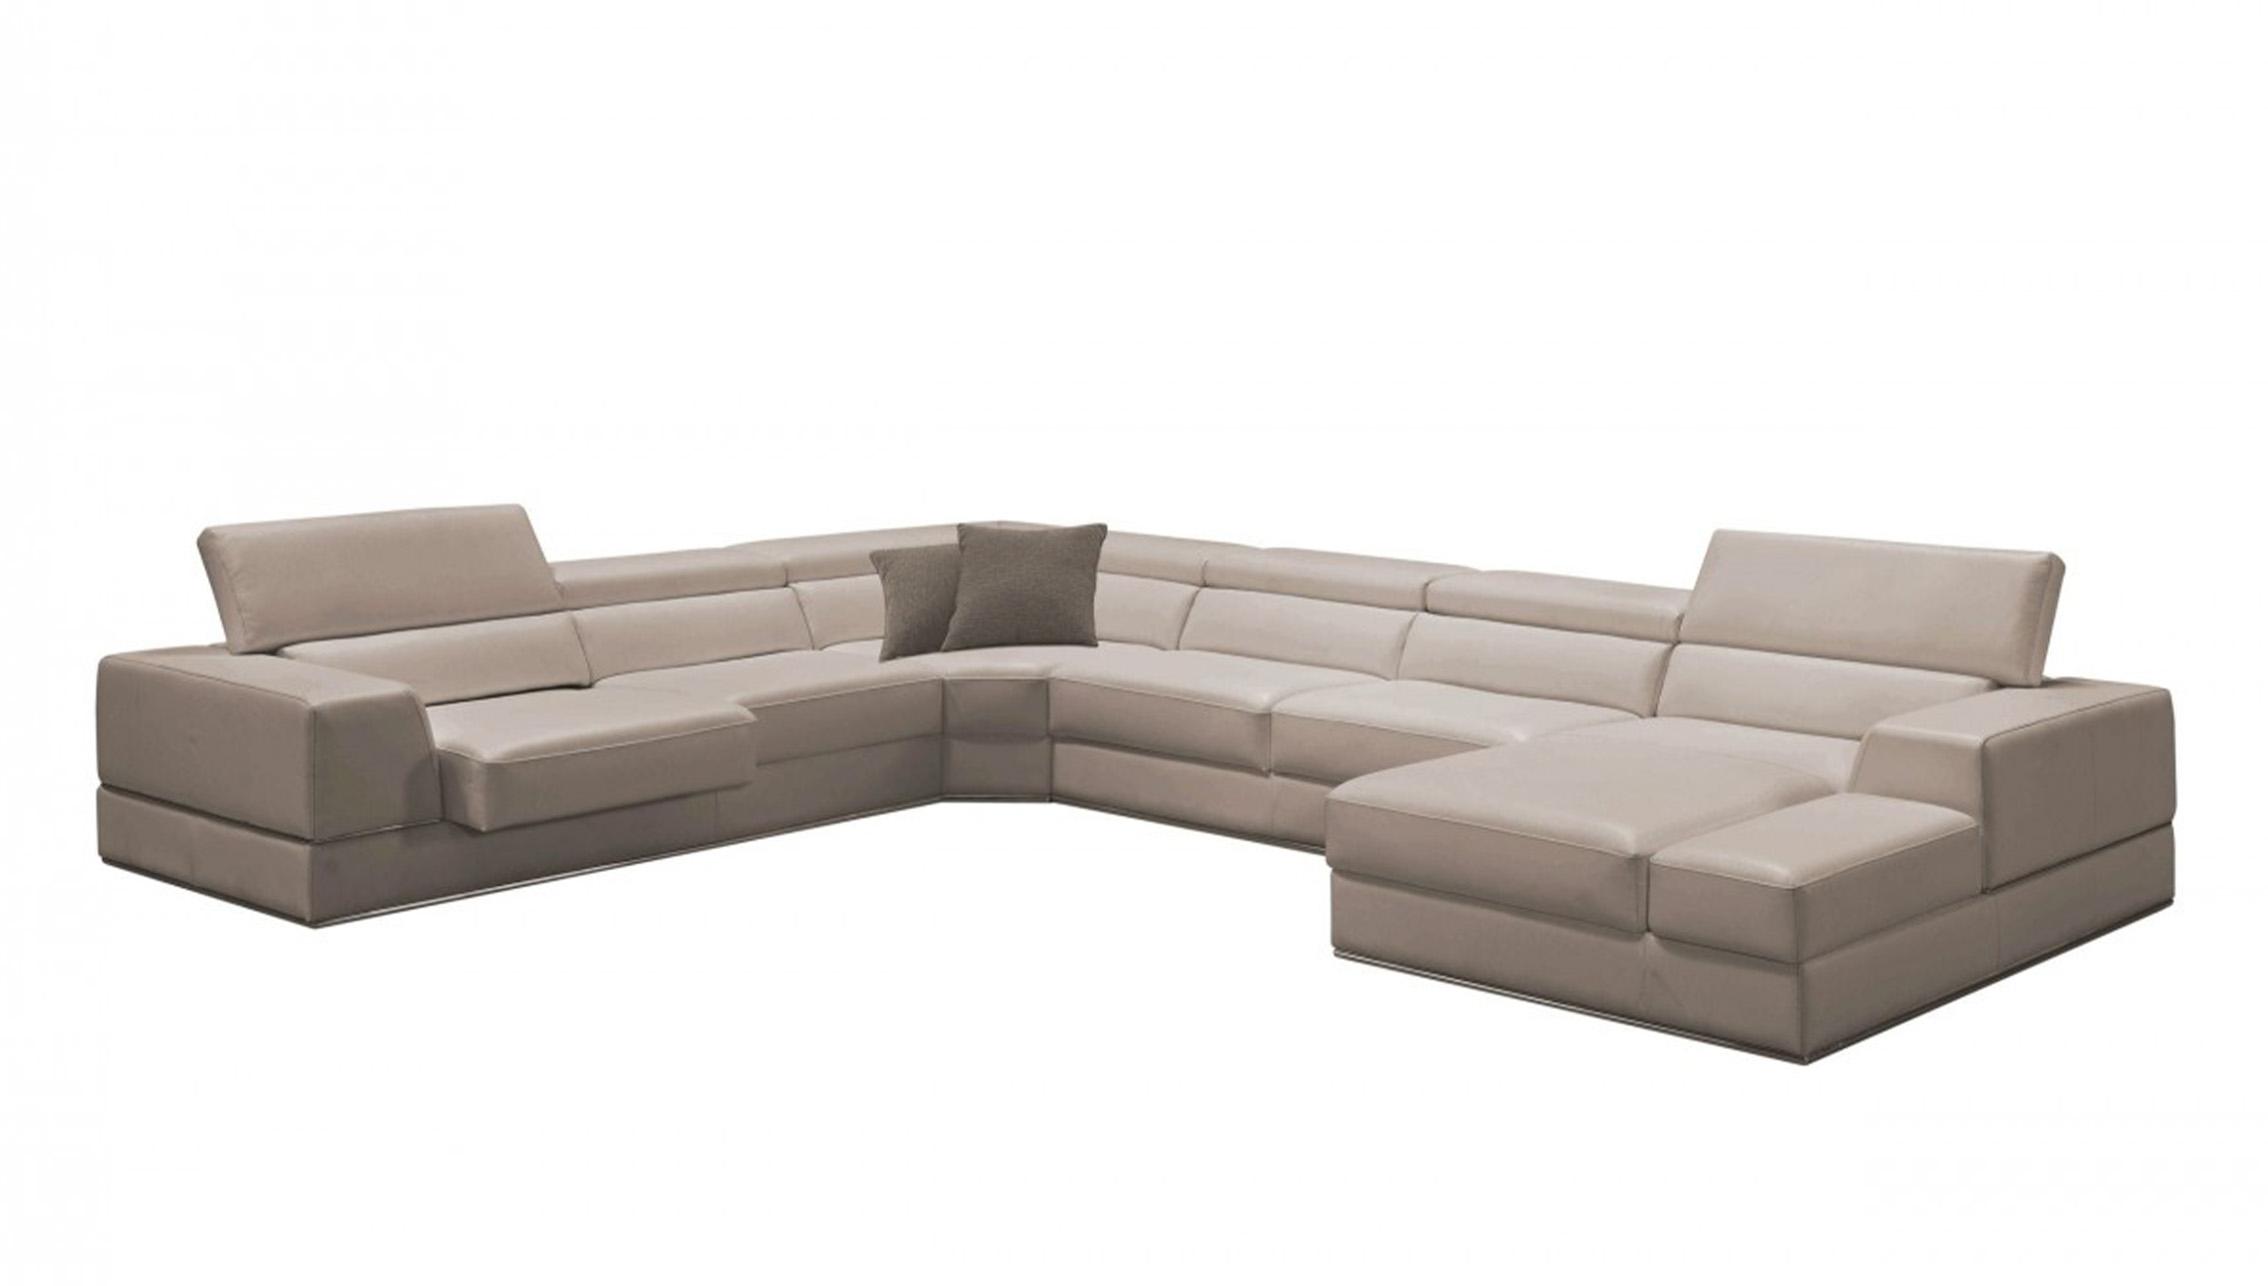 

    
VIG Furniture VGCA5106-GRY-SECT Sectional Sofa Light Gray VGCA5106-GRY-SECT
